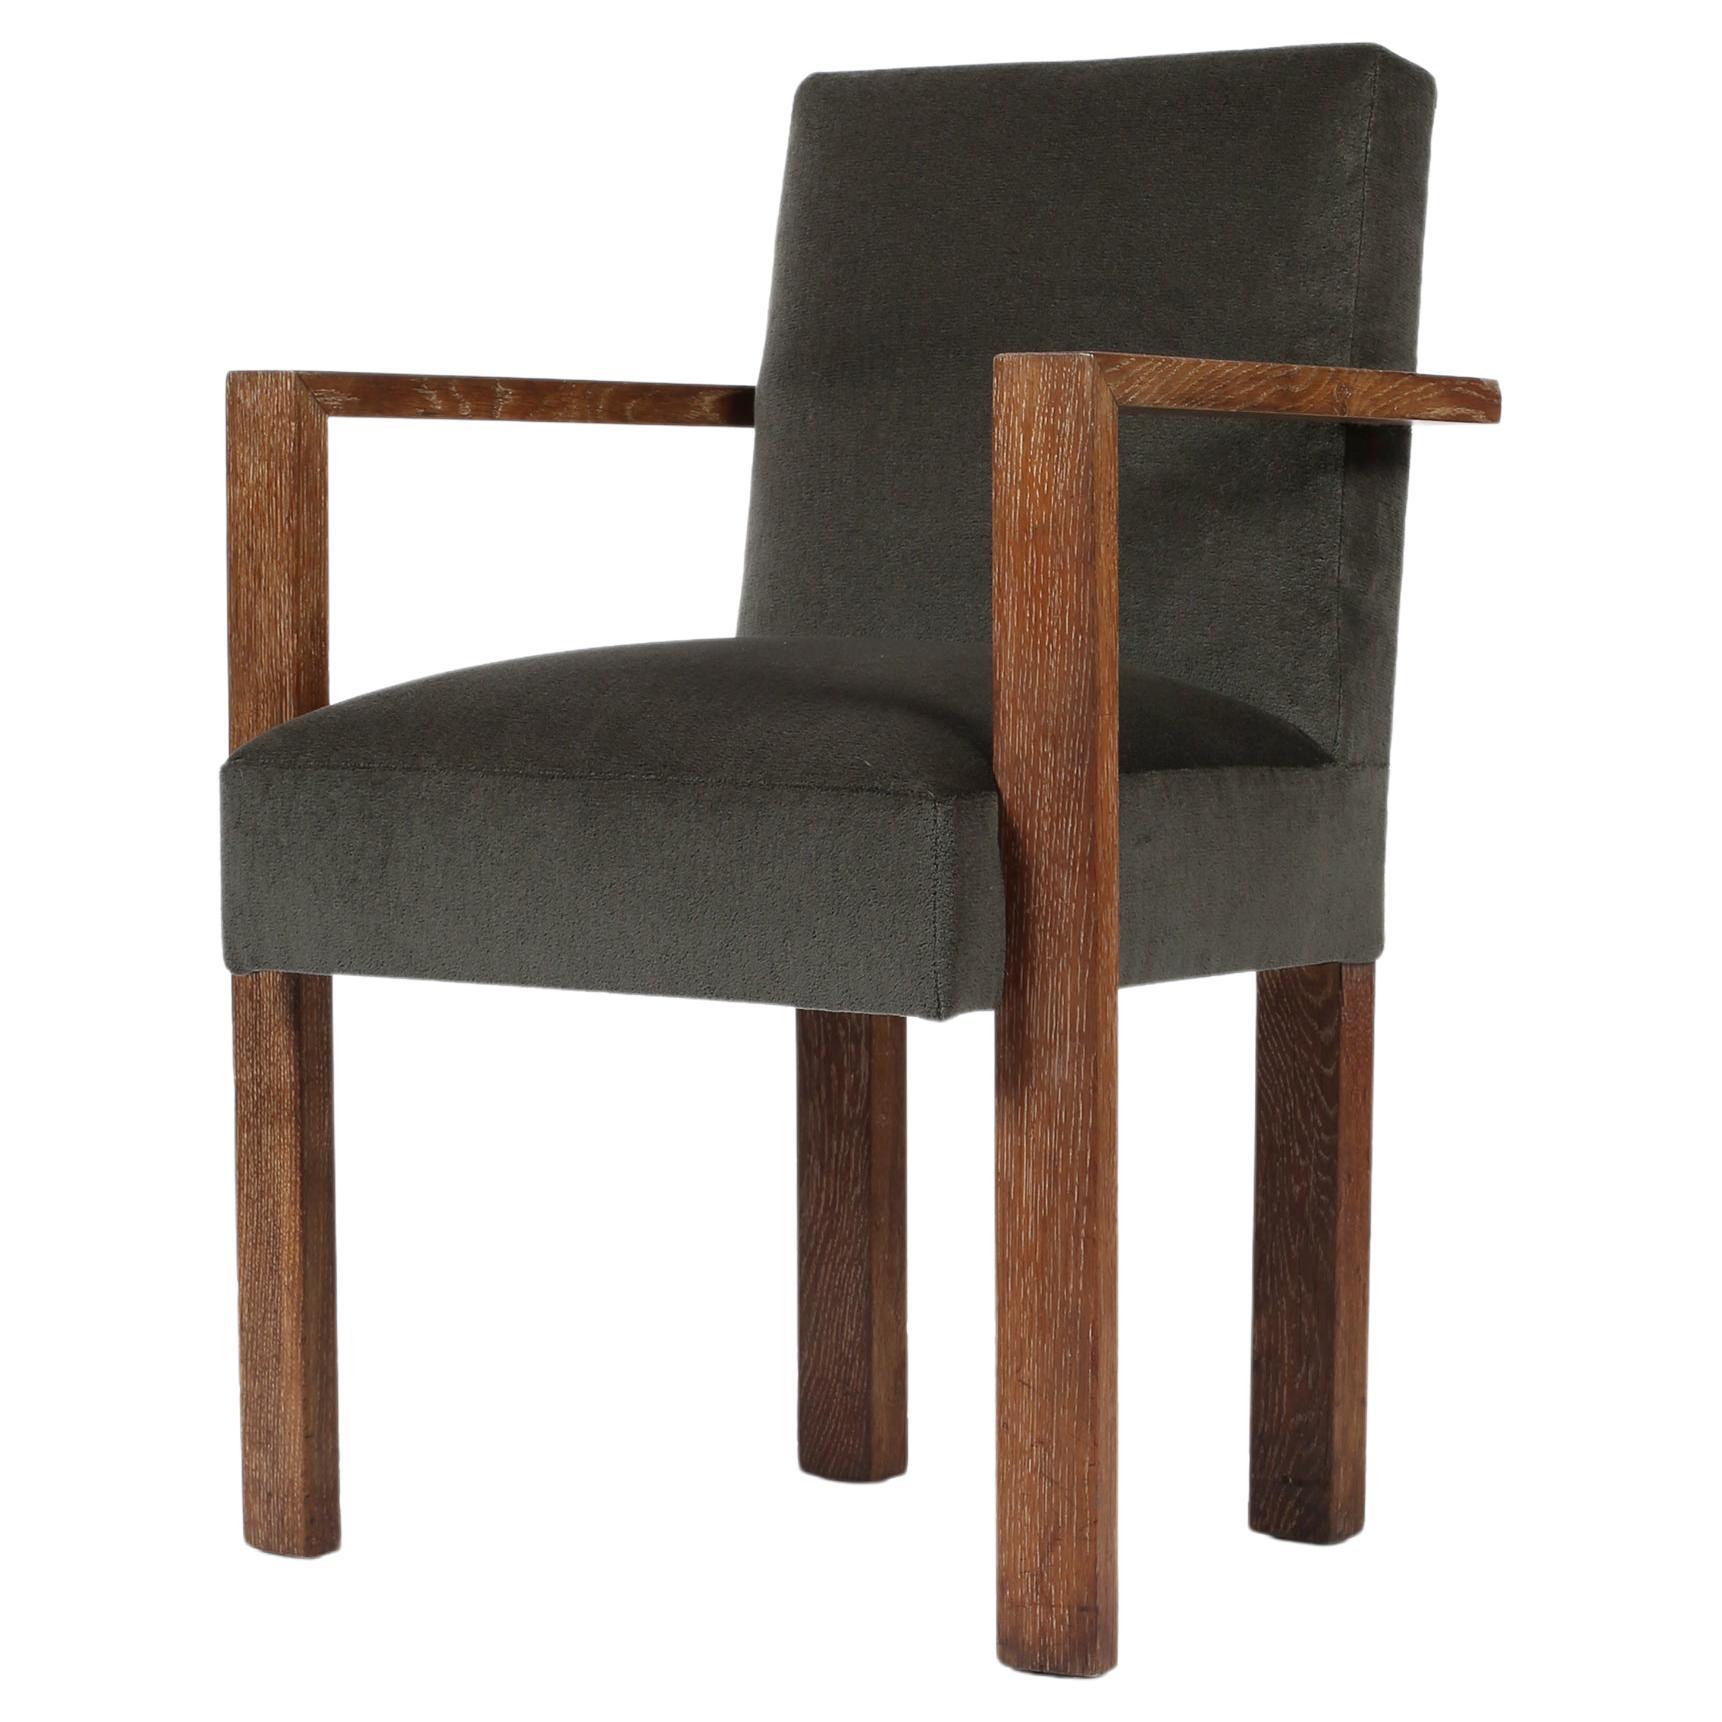 1940s French Modernist Armchair in Limed Oak and Mohair For Sale